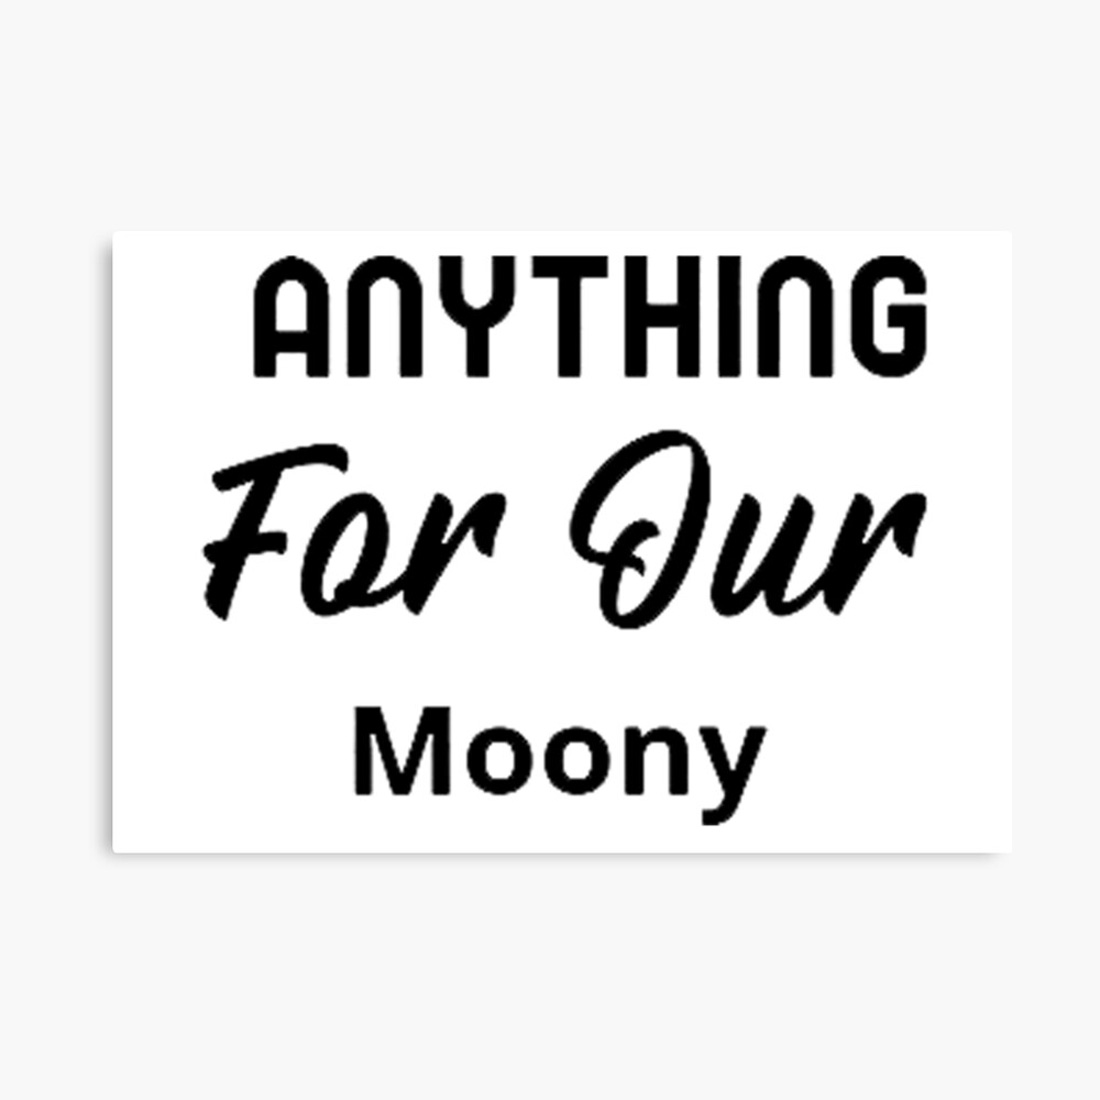 Anything For Our Moony preview image.